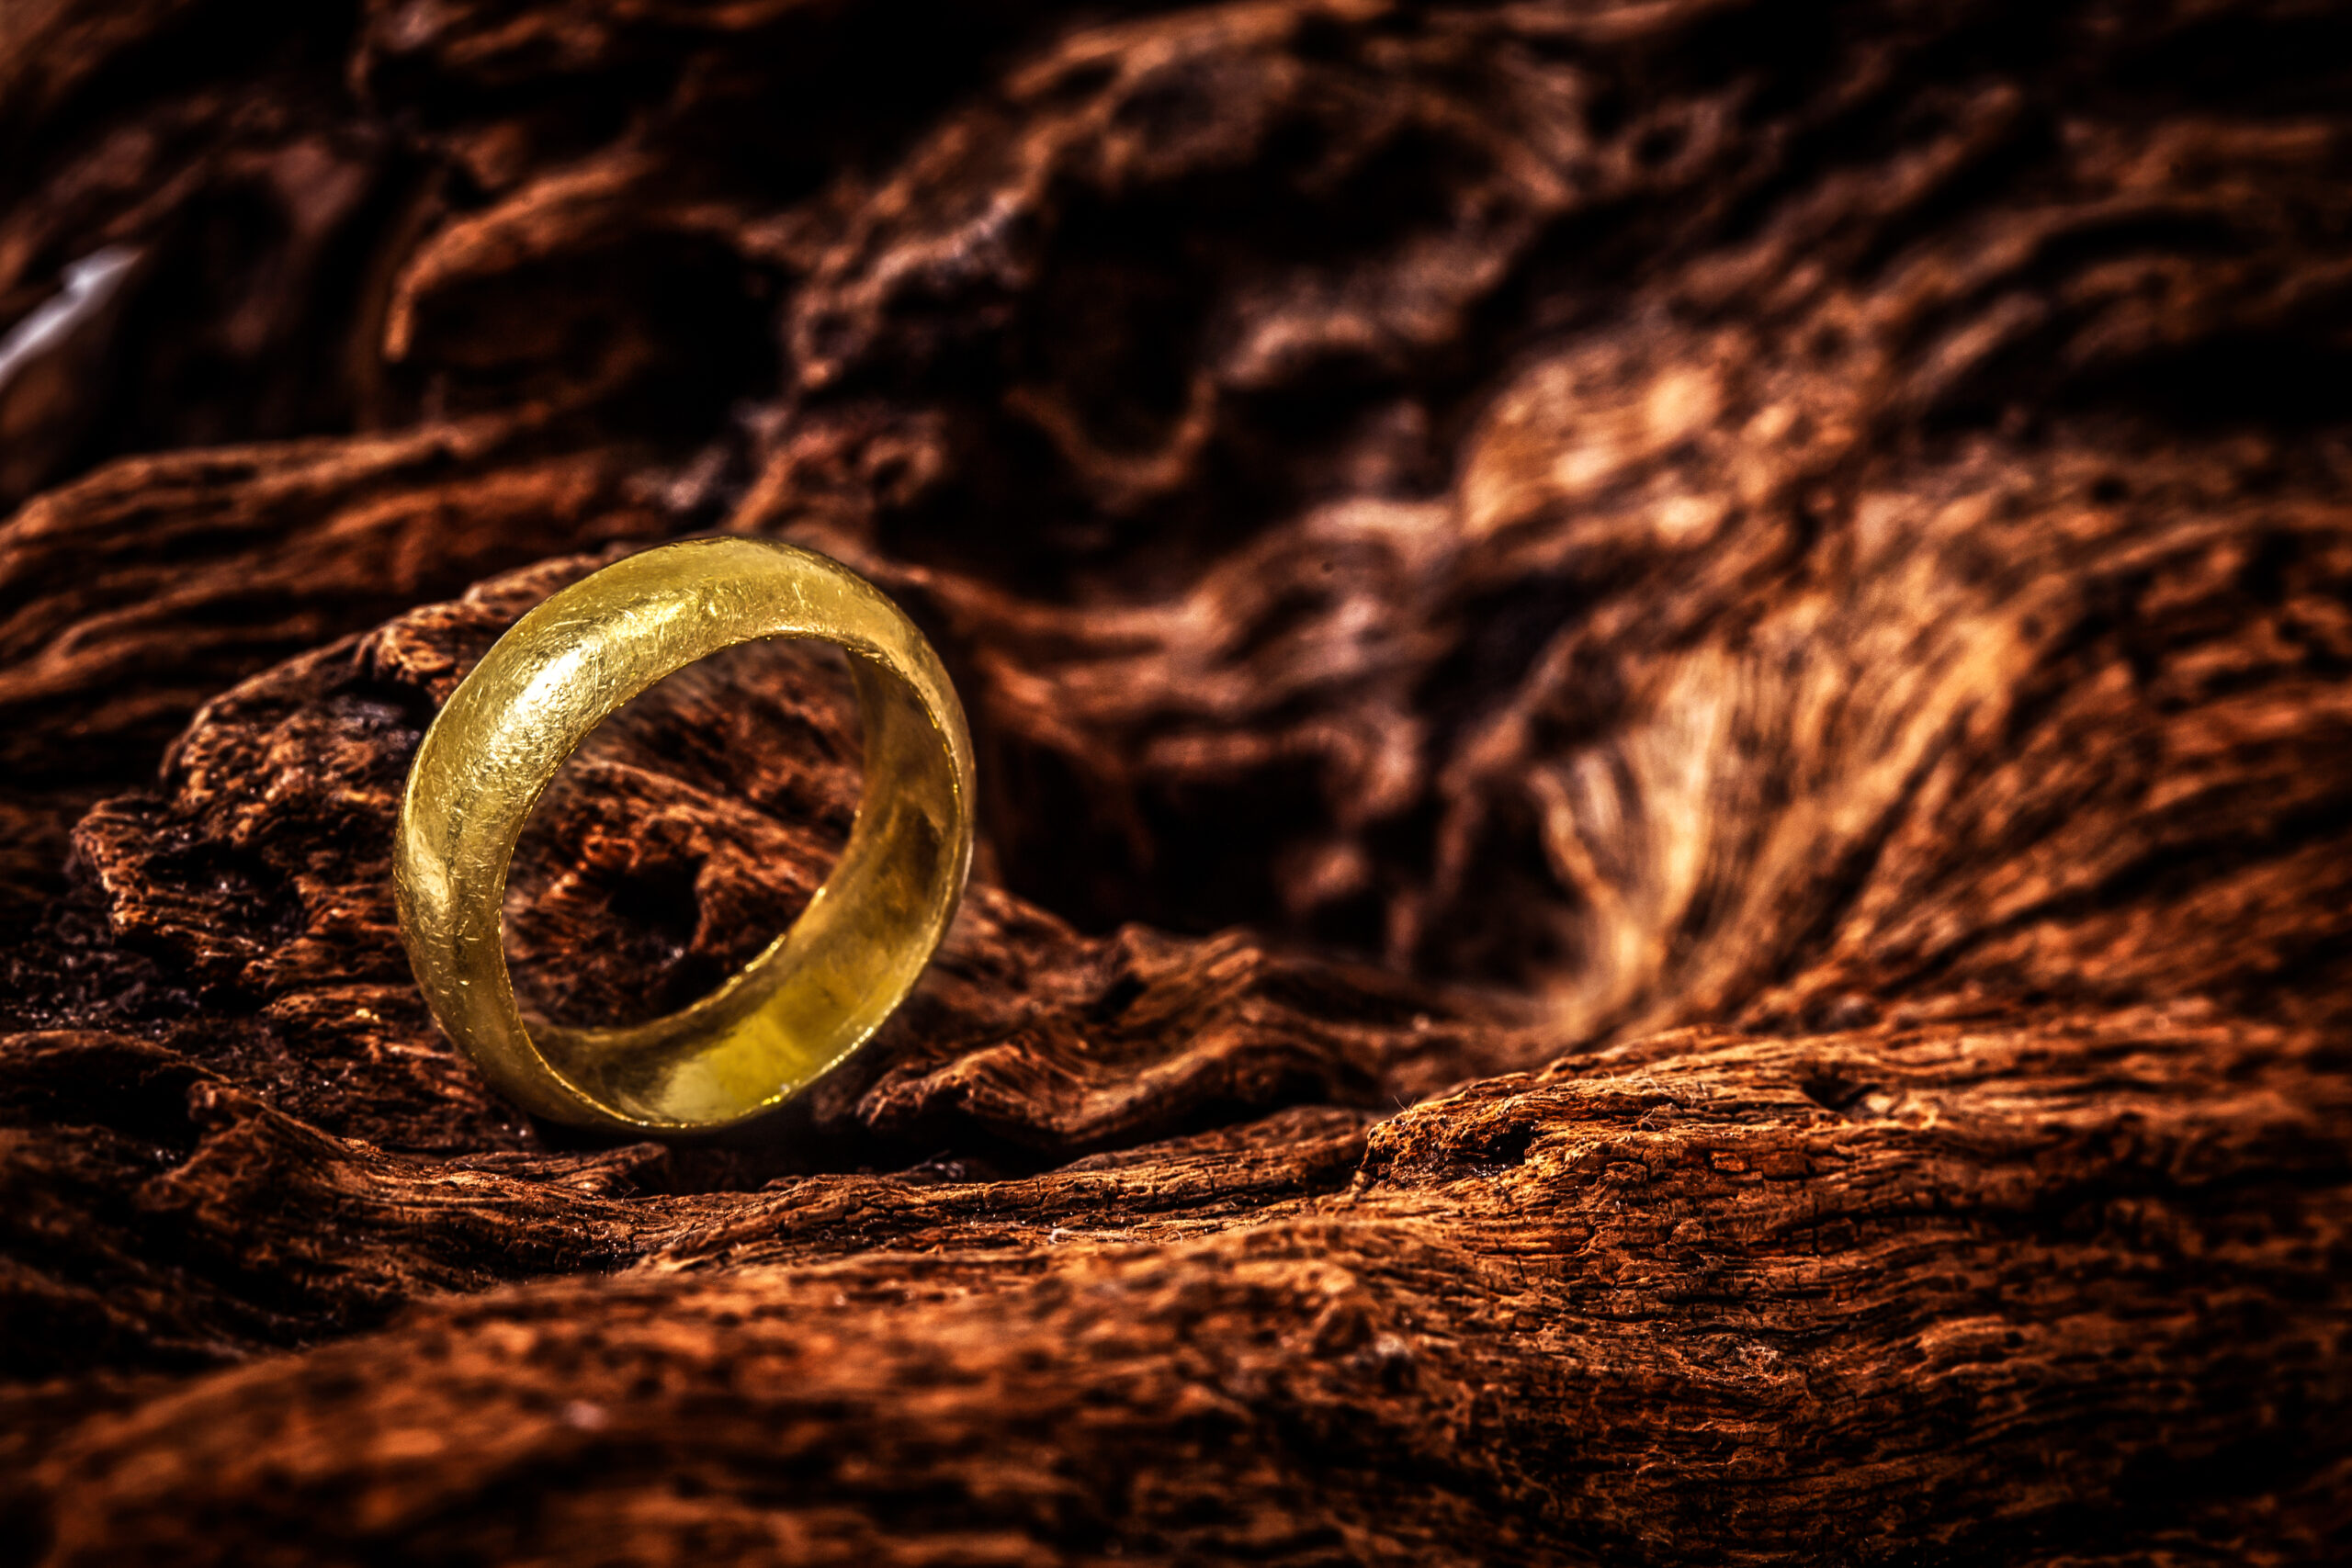 Old golden ring in dark background, one of Lord of the Rings filming locations